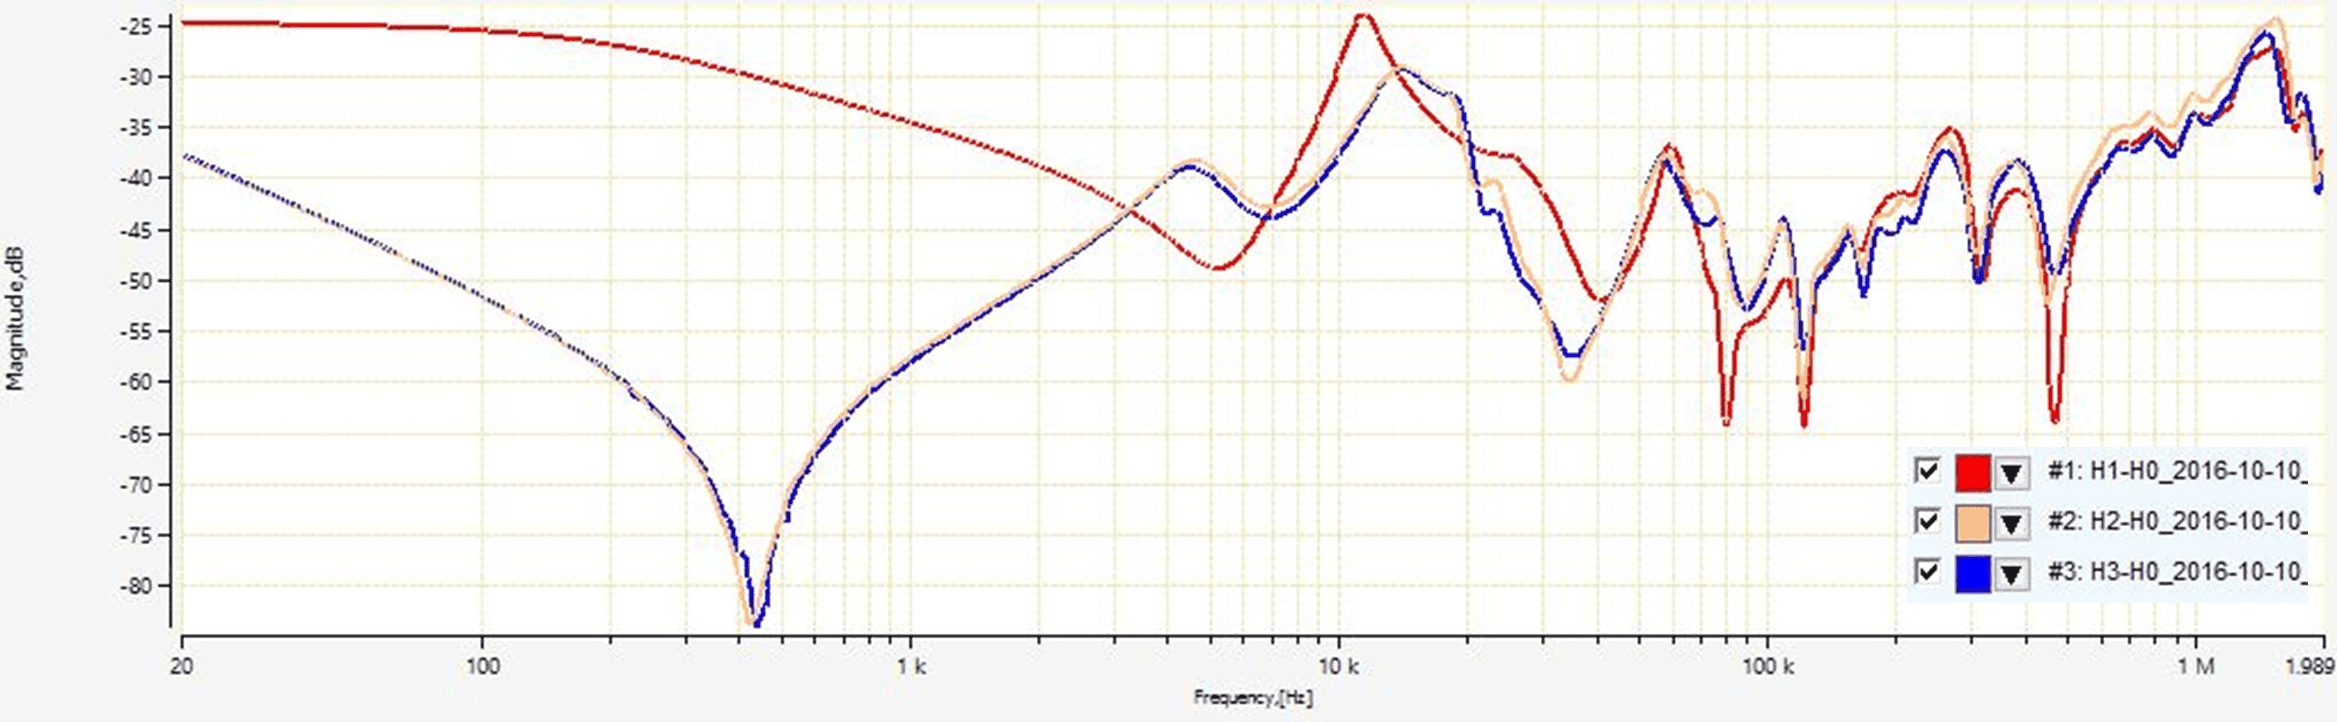 Frequency response of HV winding when LV winding is shortened and when